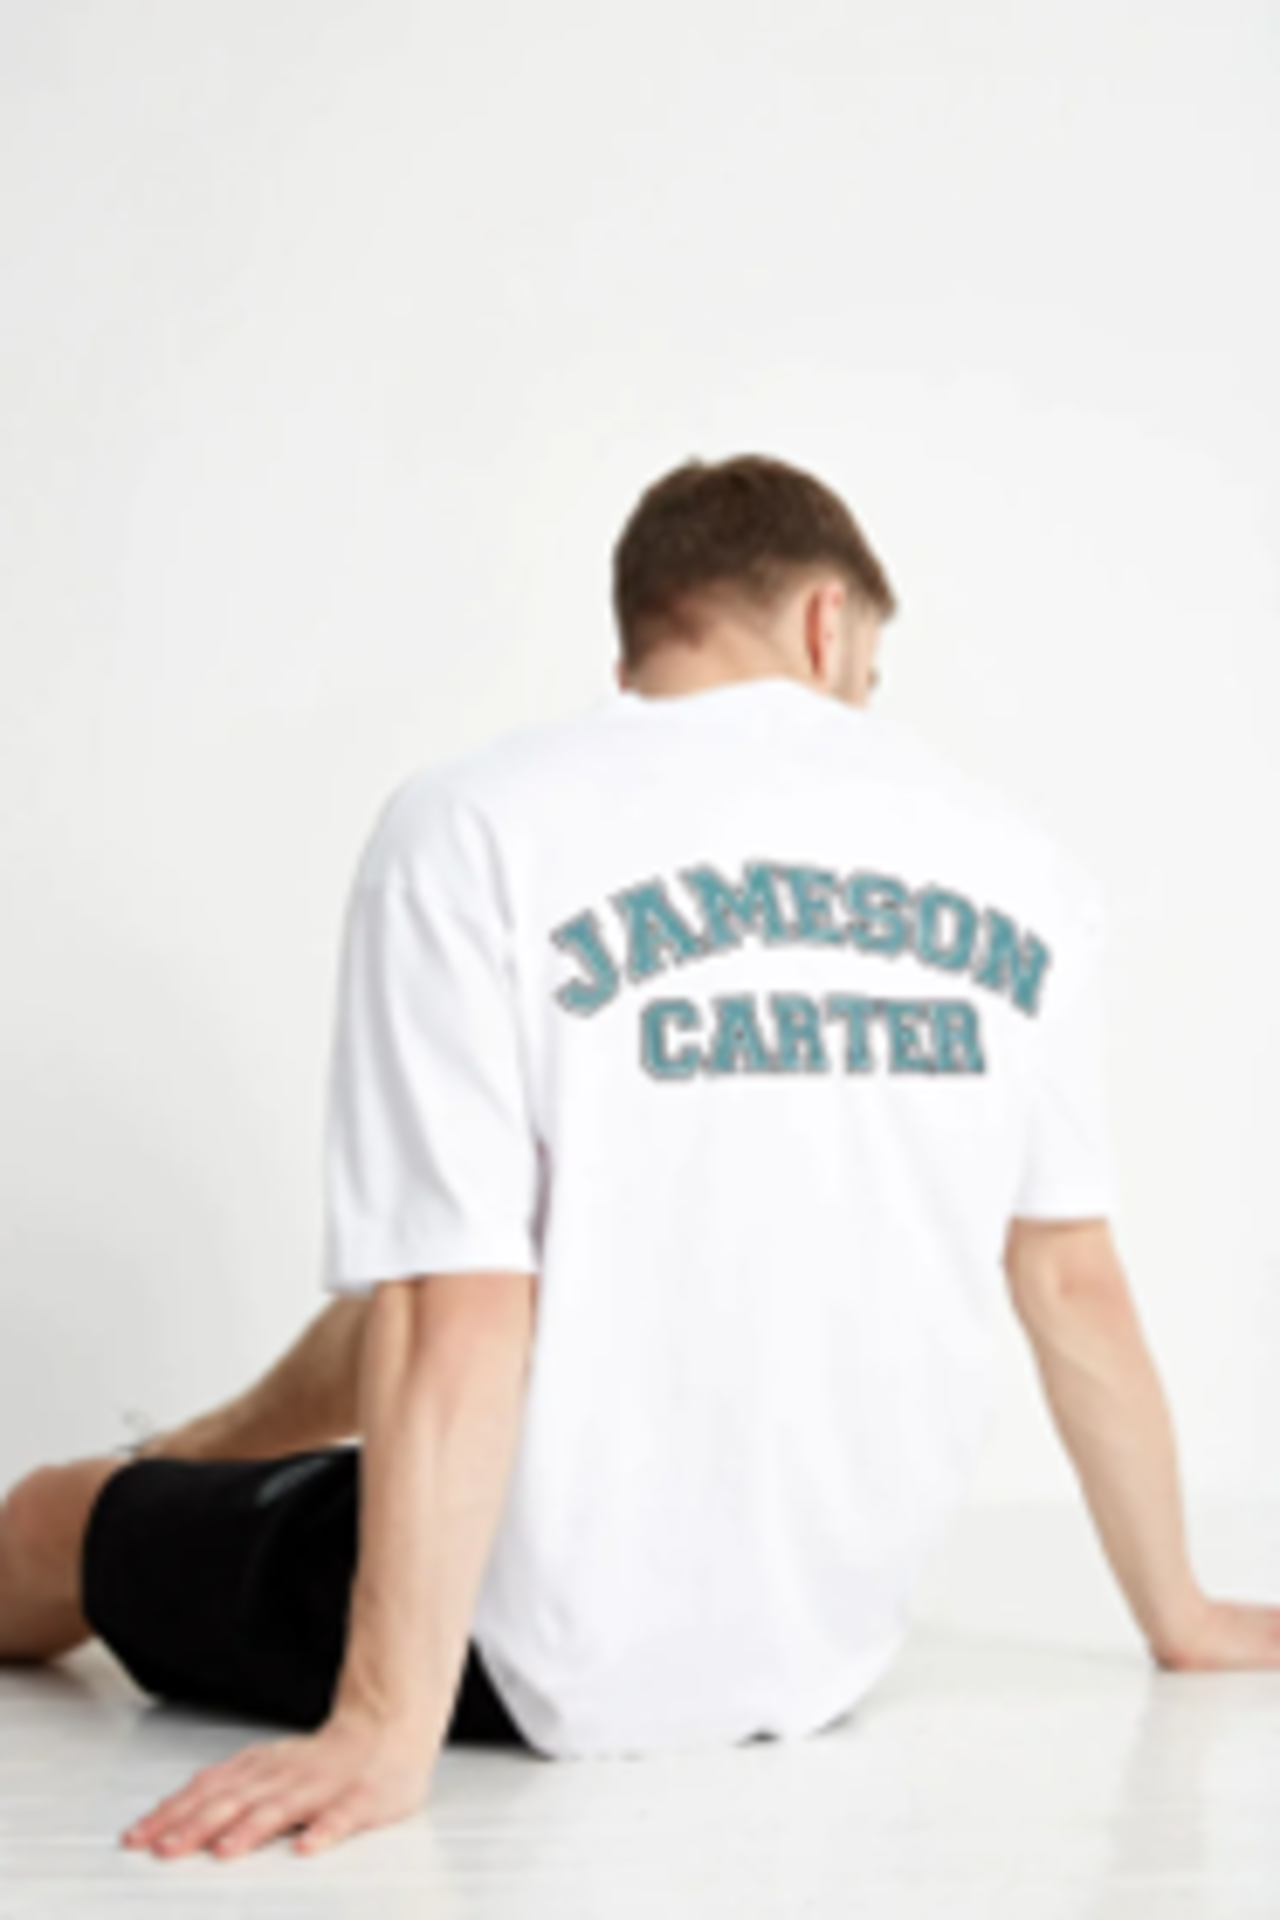 TRADE LOT 100 x NEW MIXED ITEMS OF JAMESON CARTER STOCK. TO INCLUDE ITEMS SUCH AS: JACKETS, - Image 6 of 13